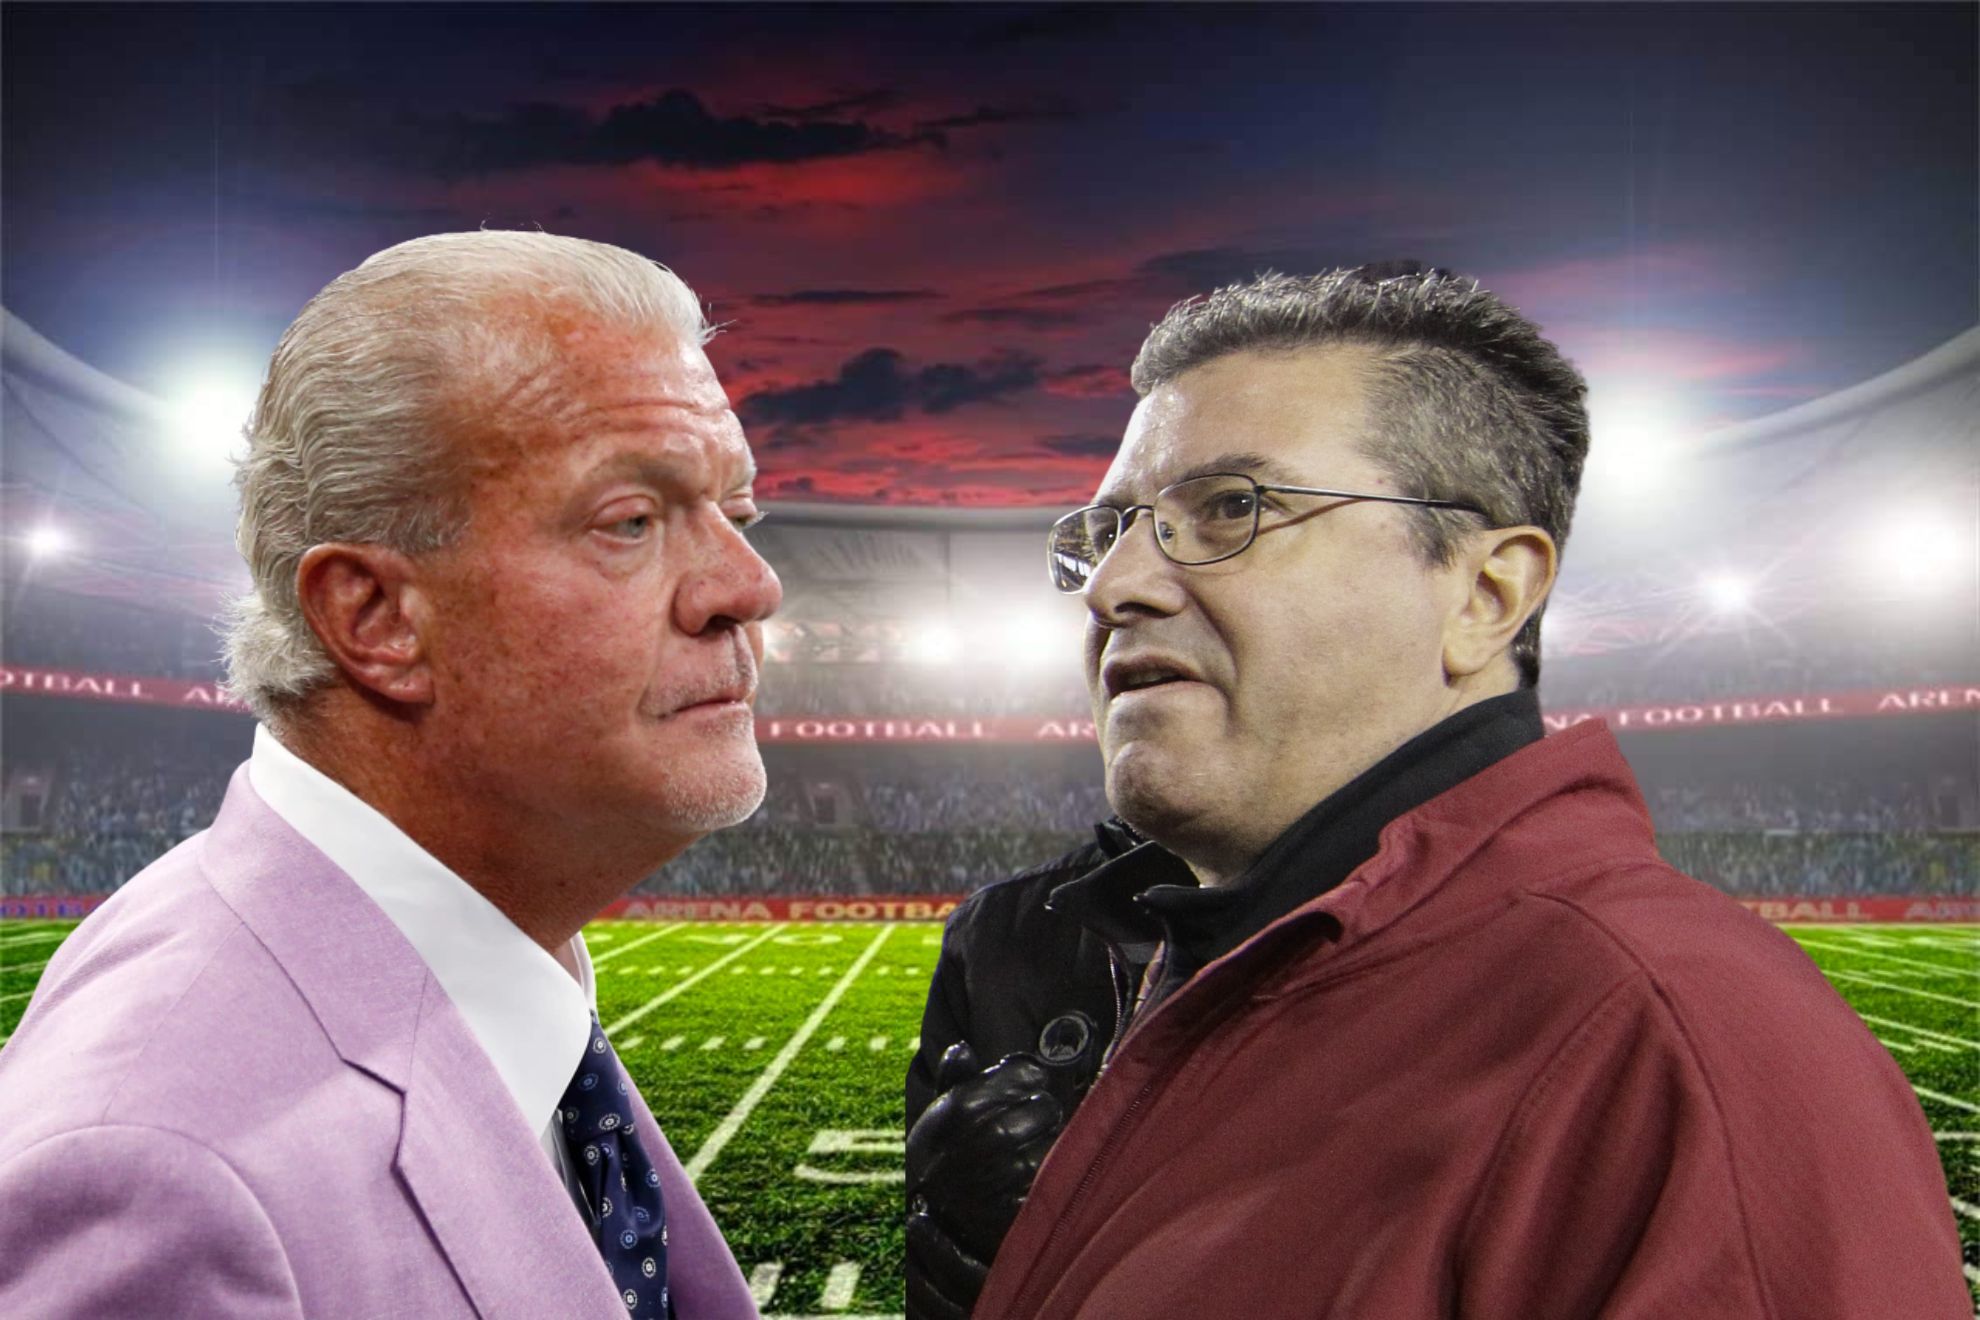 Colts owner Jim Irsay (left) says he isn't ready to call on a vote to oust Dan Snyder (right) from NFL ownership.